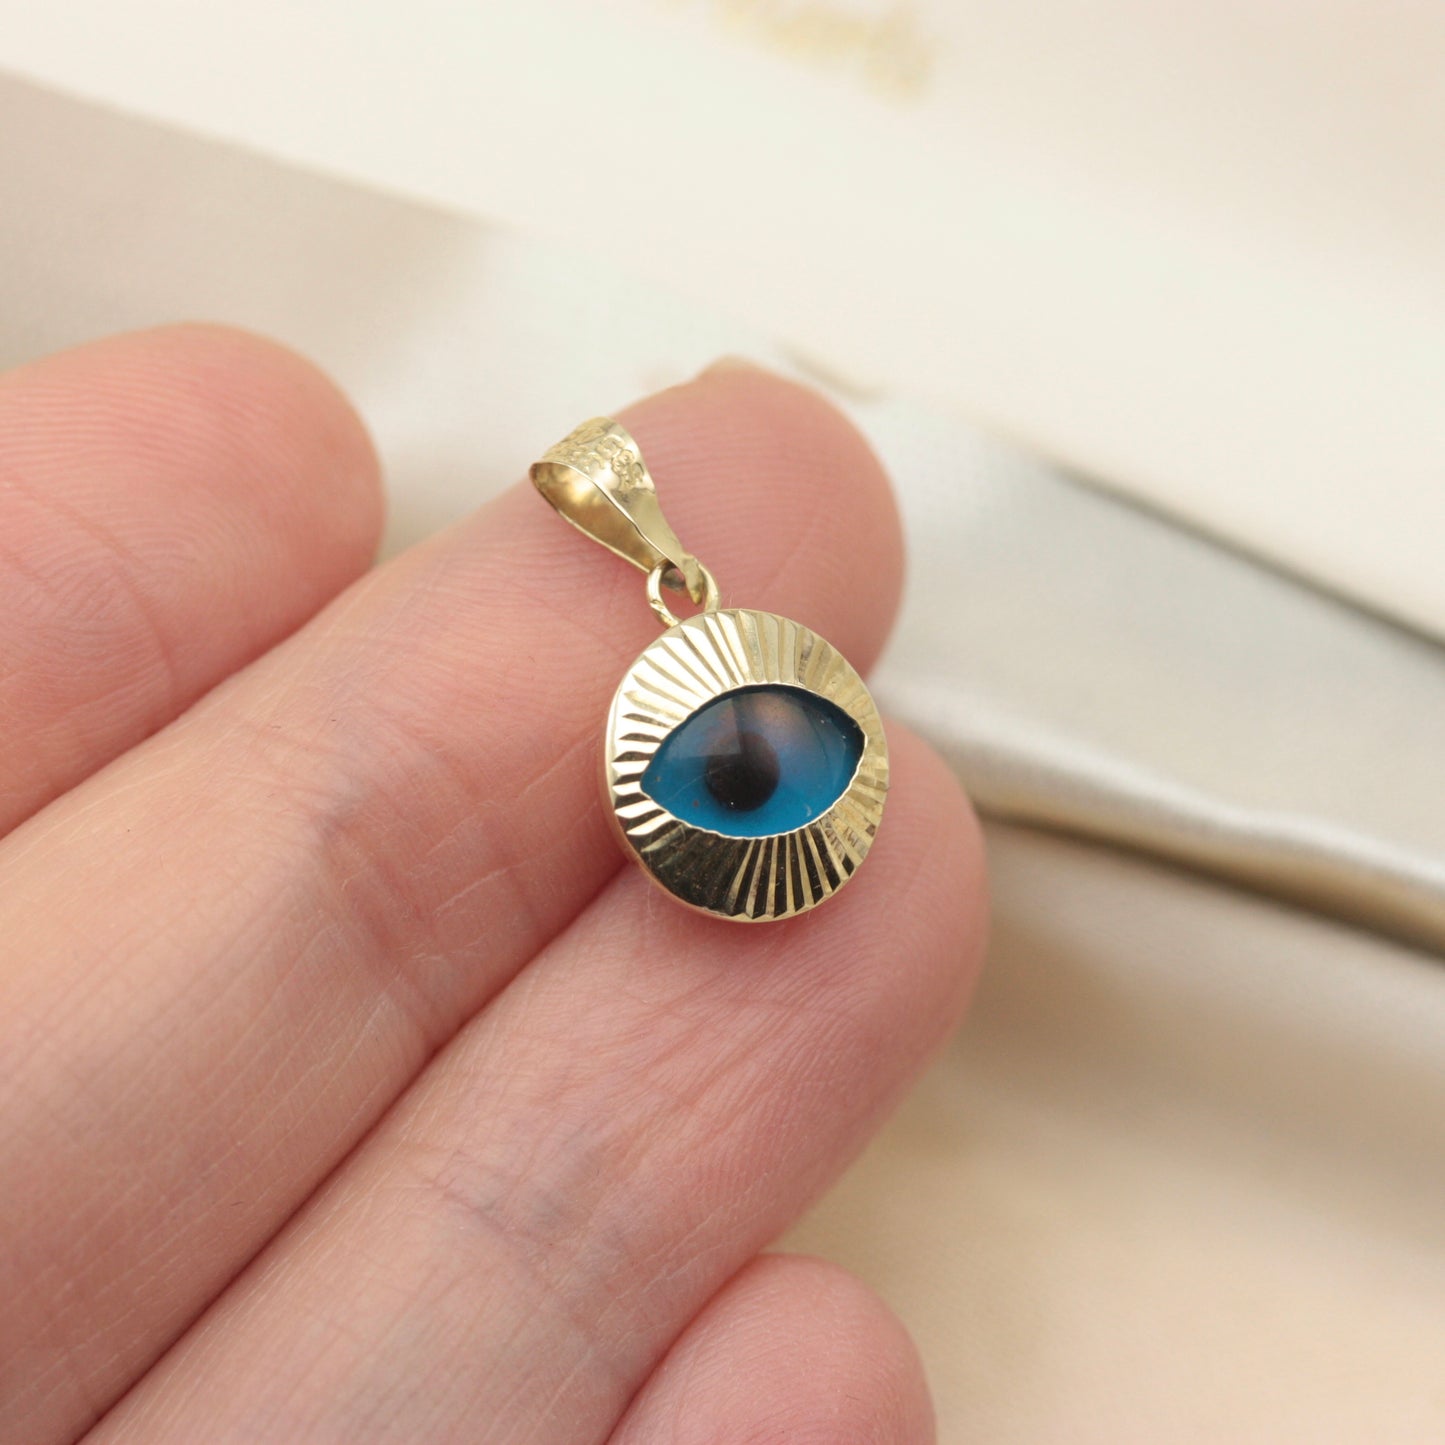 Pre-owned 14K Gold and Glass Turkish Nazar Eye Pendant